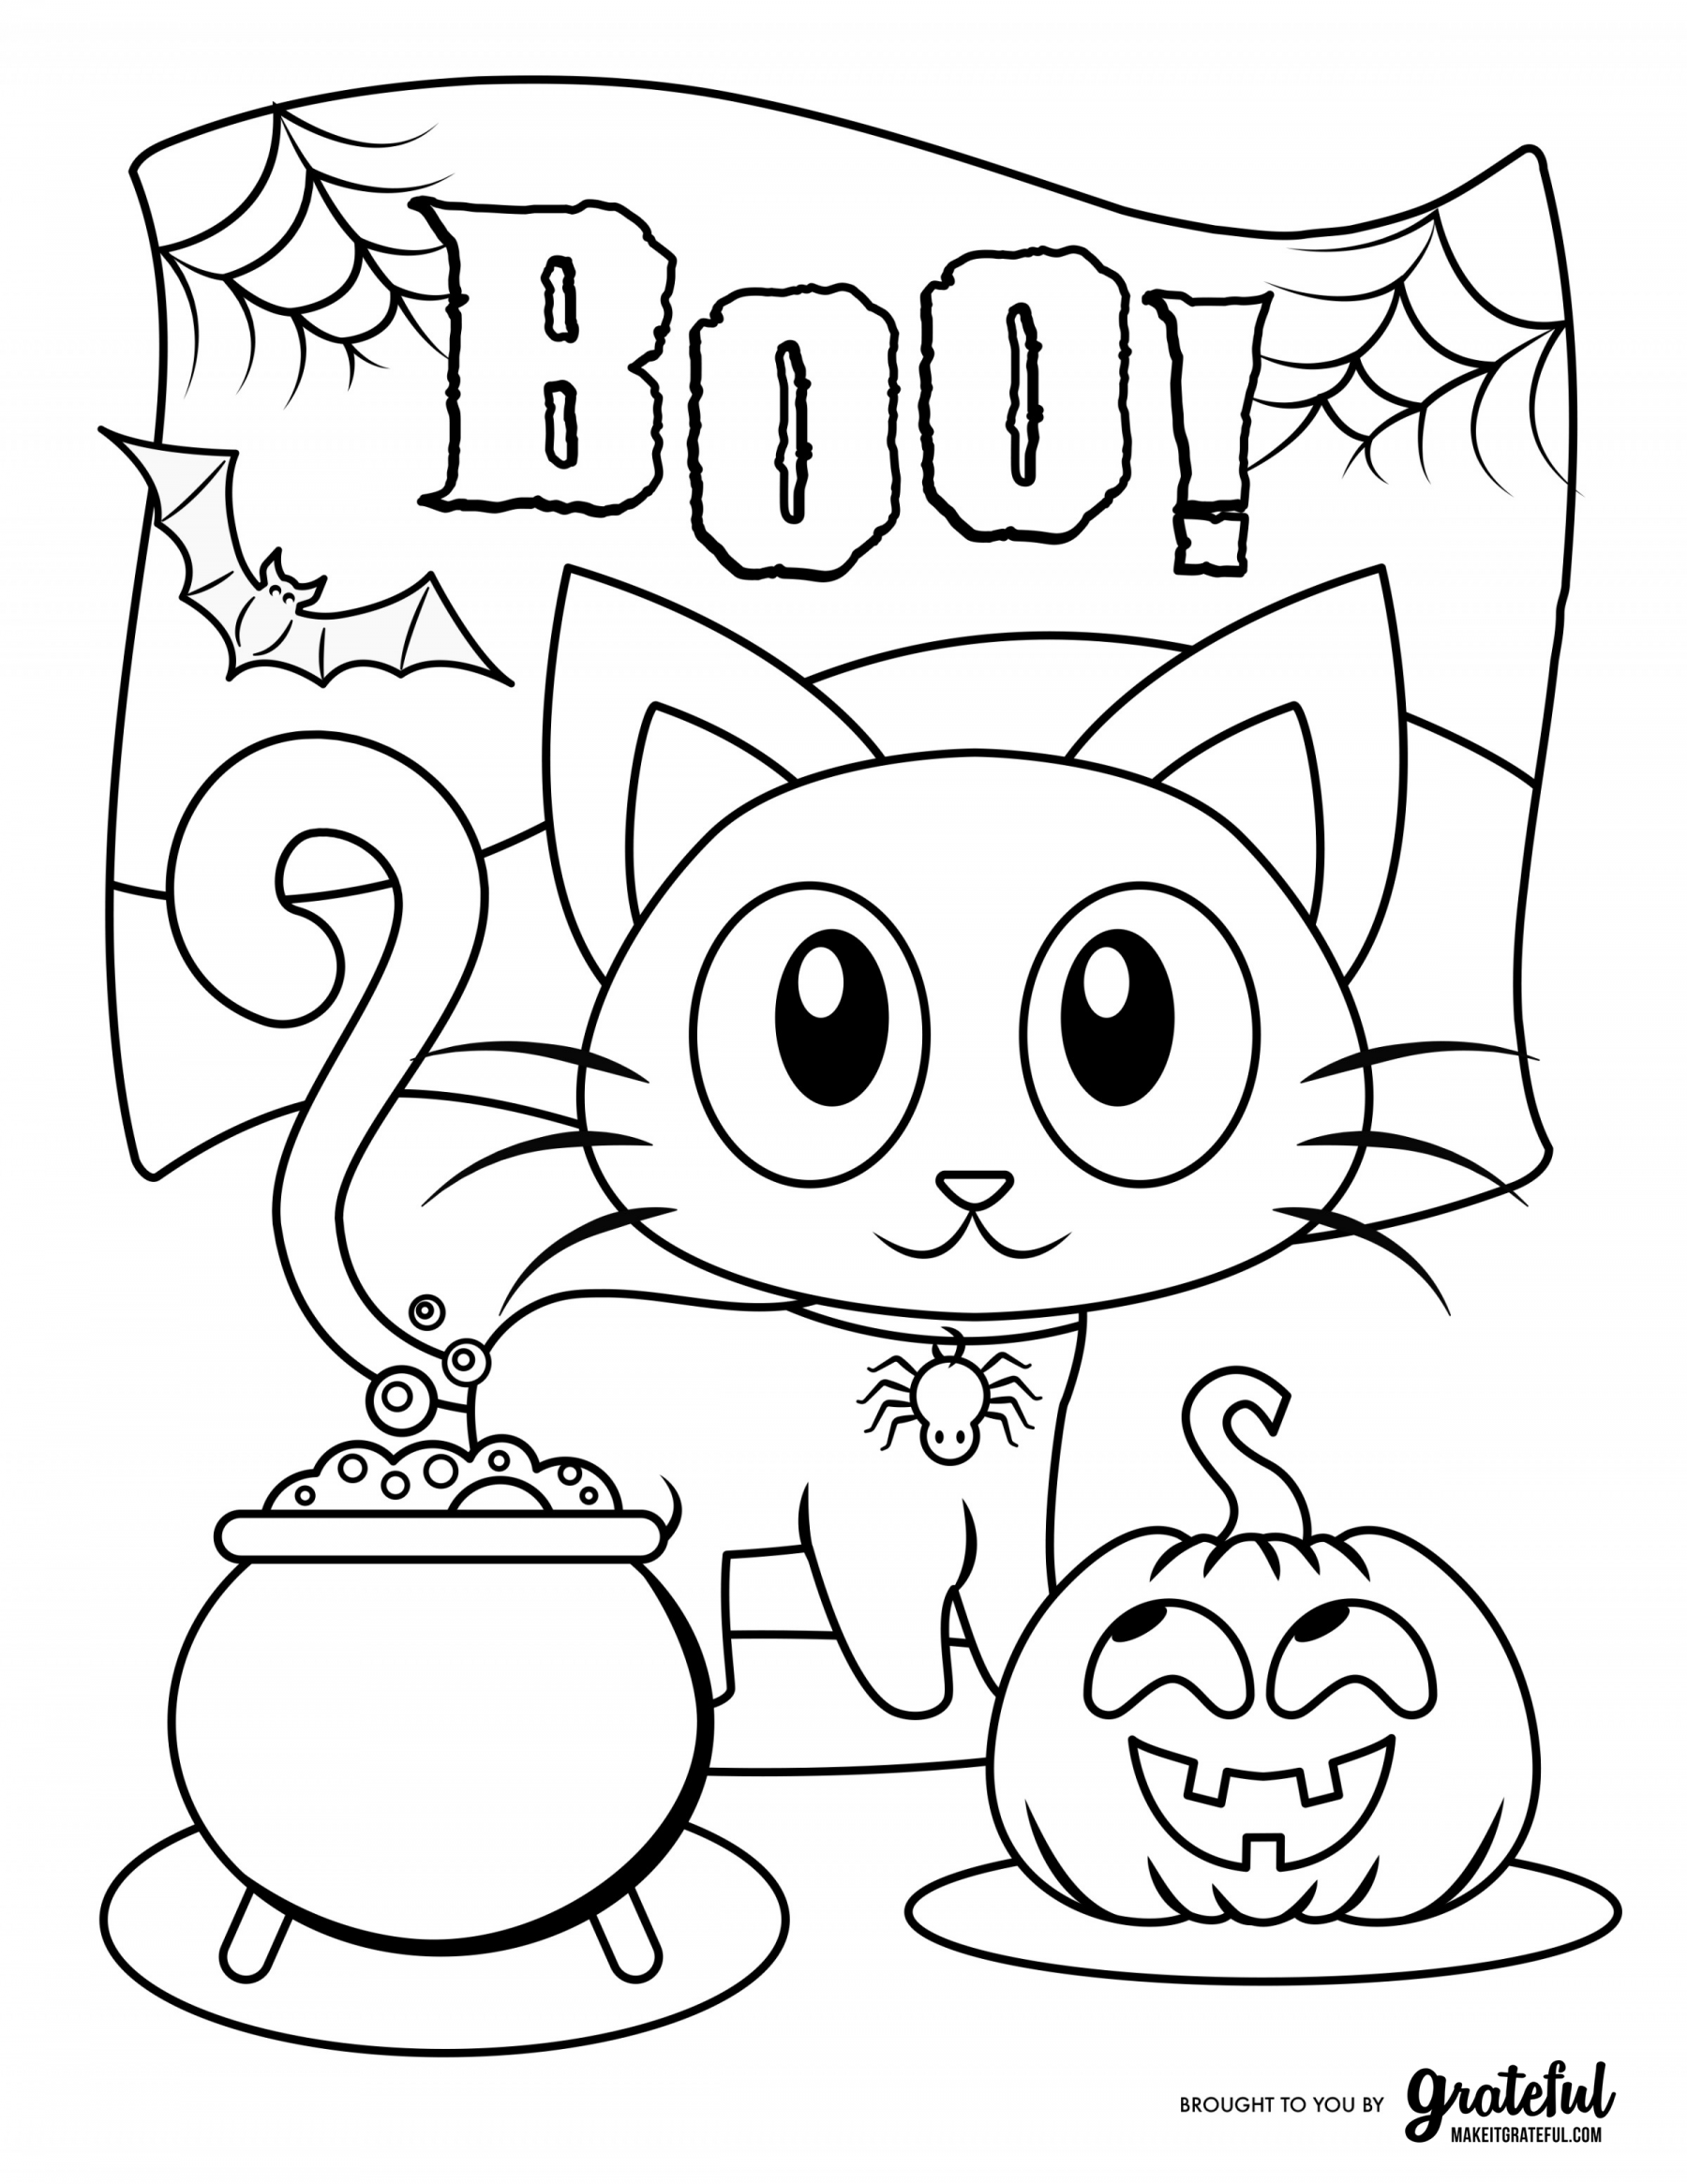 Free Halloween coloring pages for kids or for the kid in you